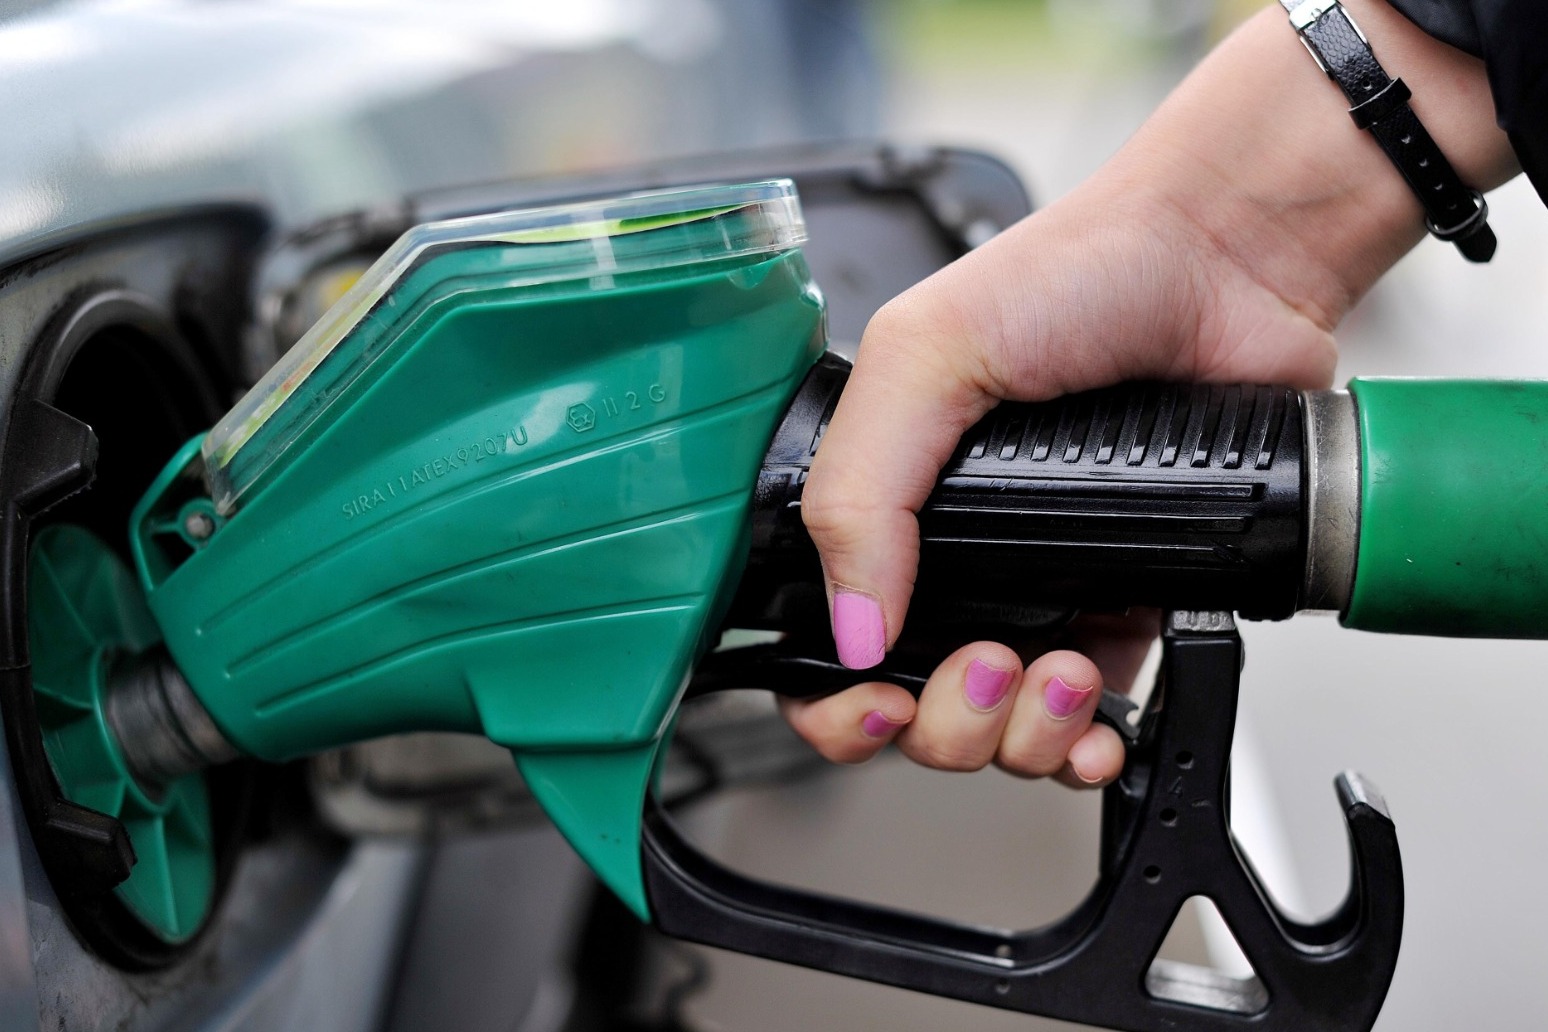 Big retailers failing to cut fuel prices in line with wholesale cost, RAC warns 